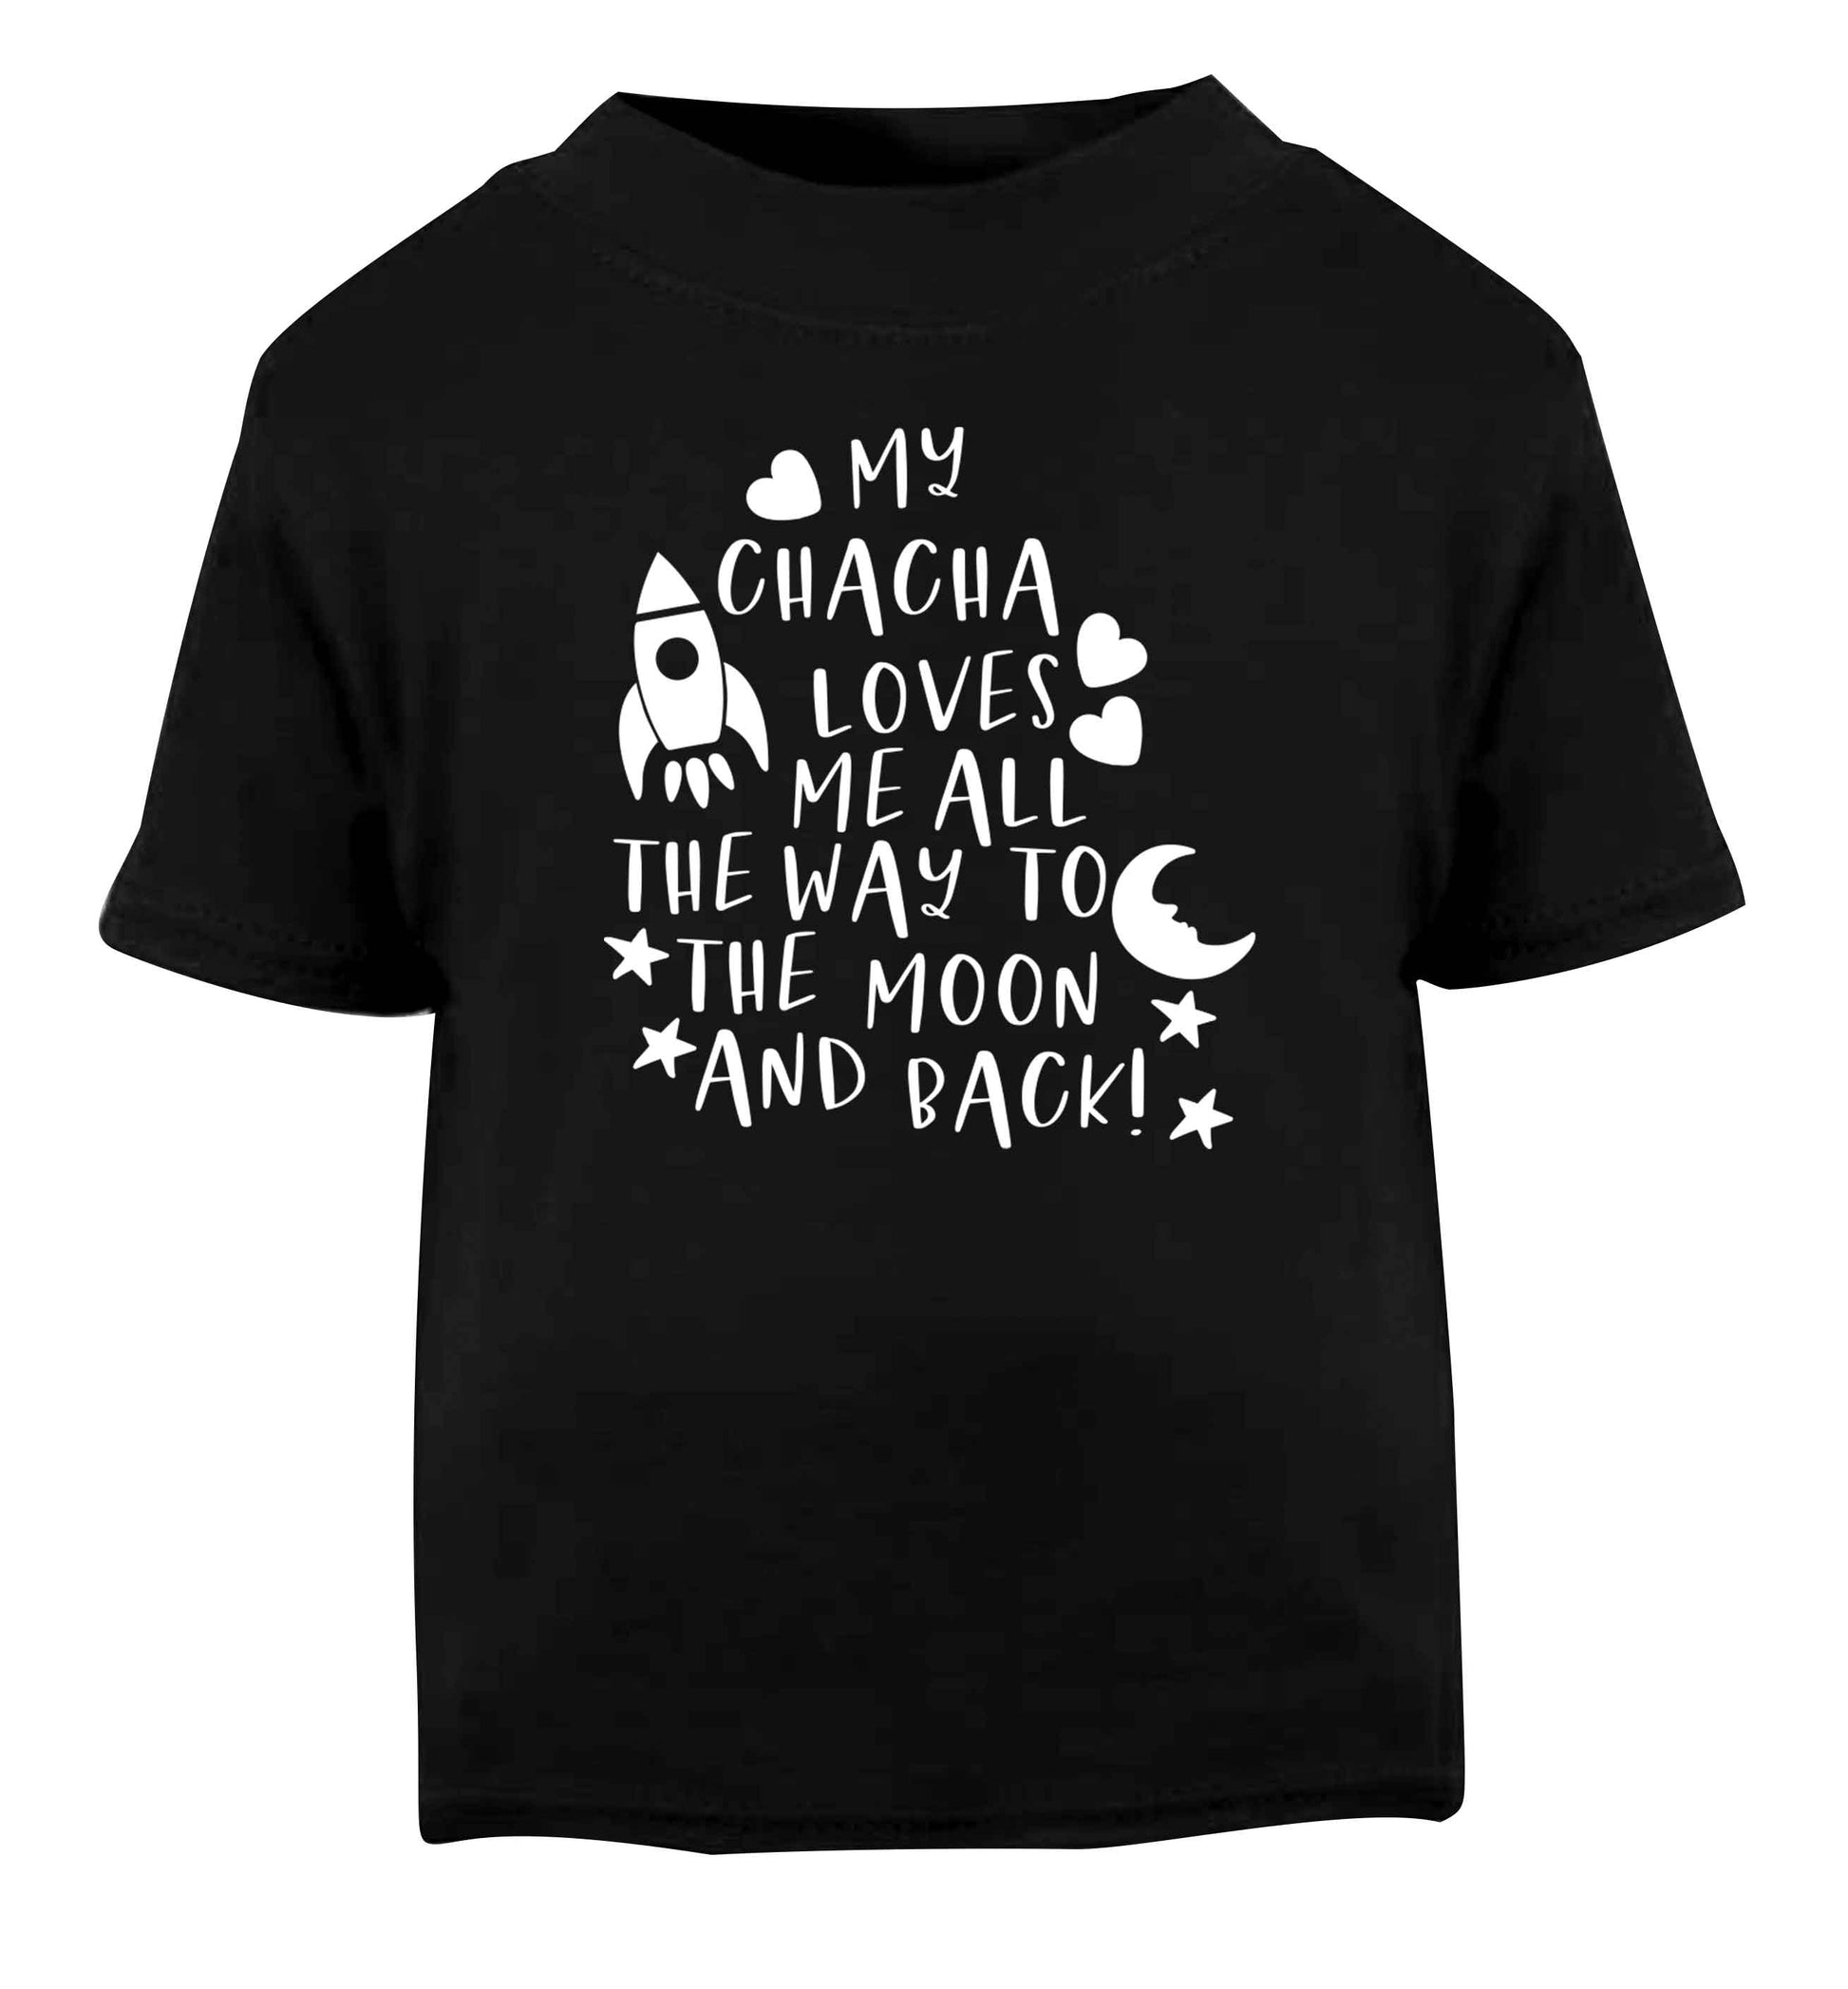 My chacha loves me all the way to the moon and back Black Baby Toddler Tshirt 2 years